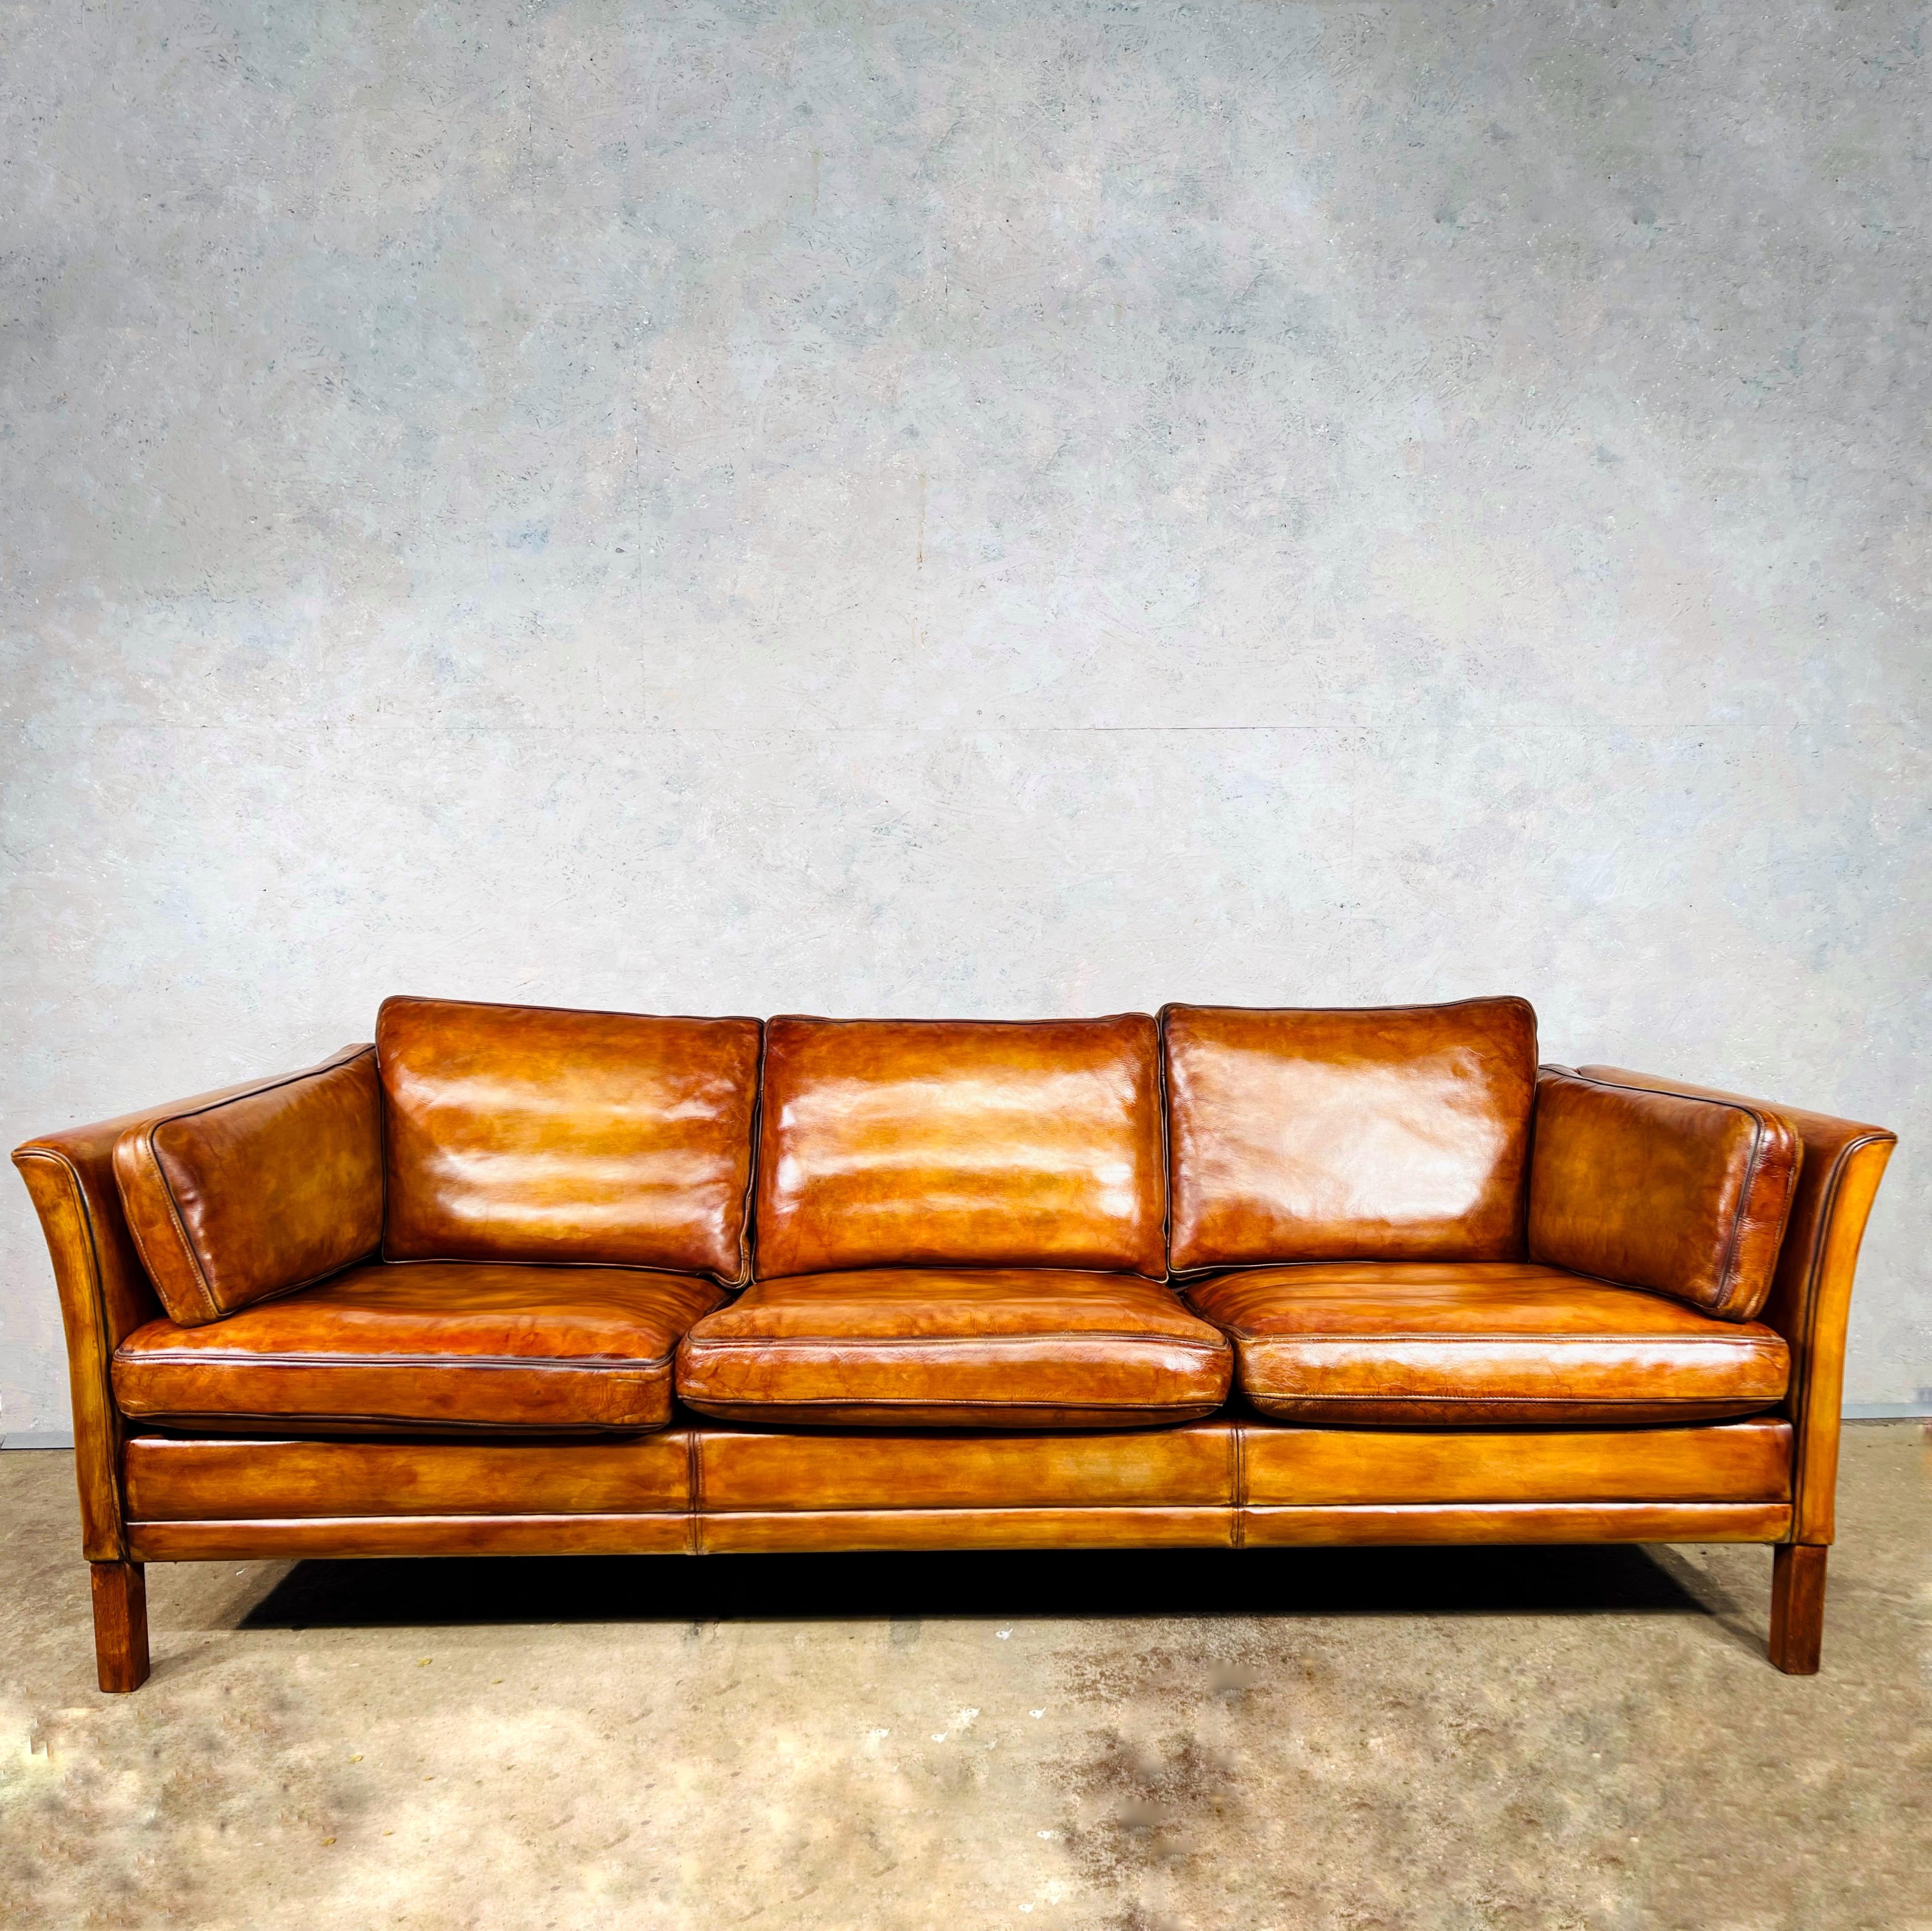 A Stylish Vintage 70s 3 seater leather sofa by Danish designer Mogens Hansen in a Patinated Light Tan colour
Great design with beautiful lines. Great size made with high quality leather.

The leather is a Stunning hand dyed Light Tan colour and